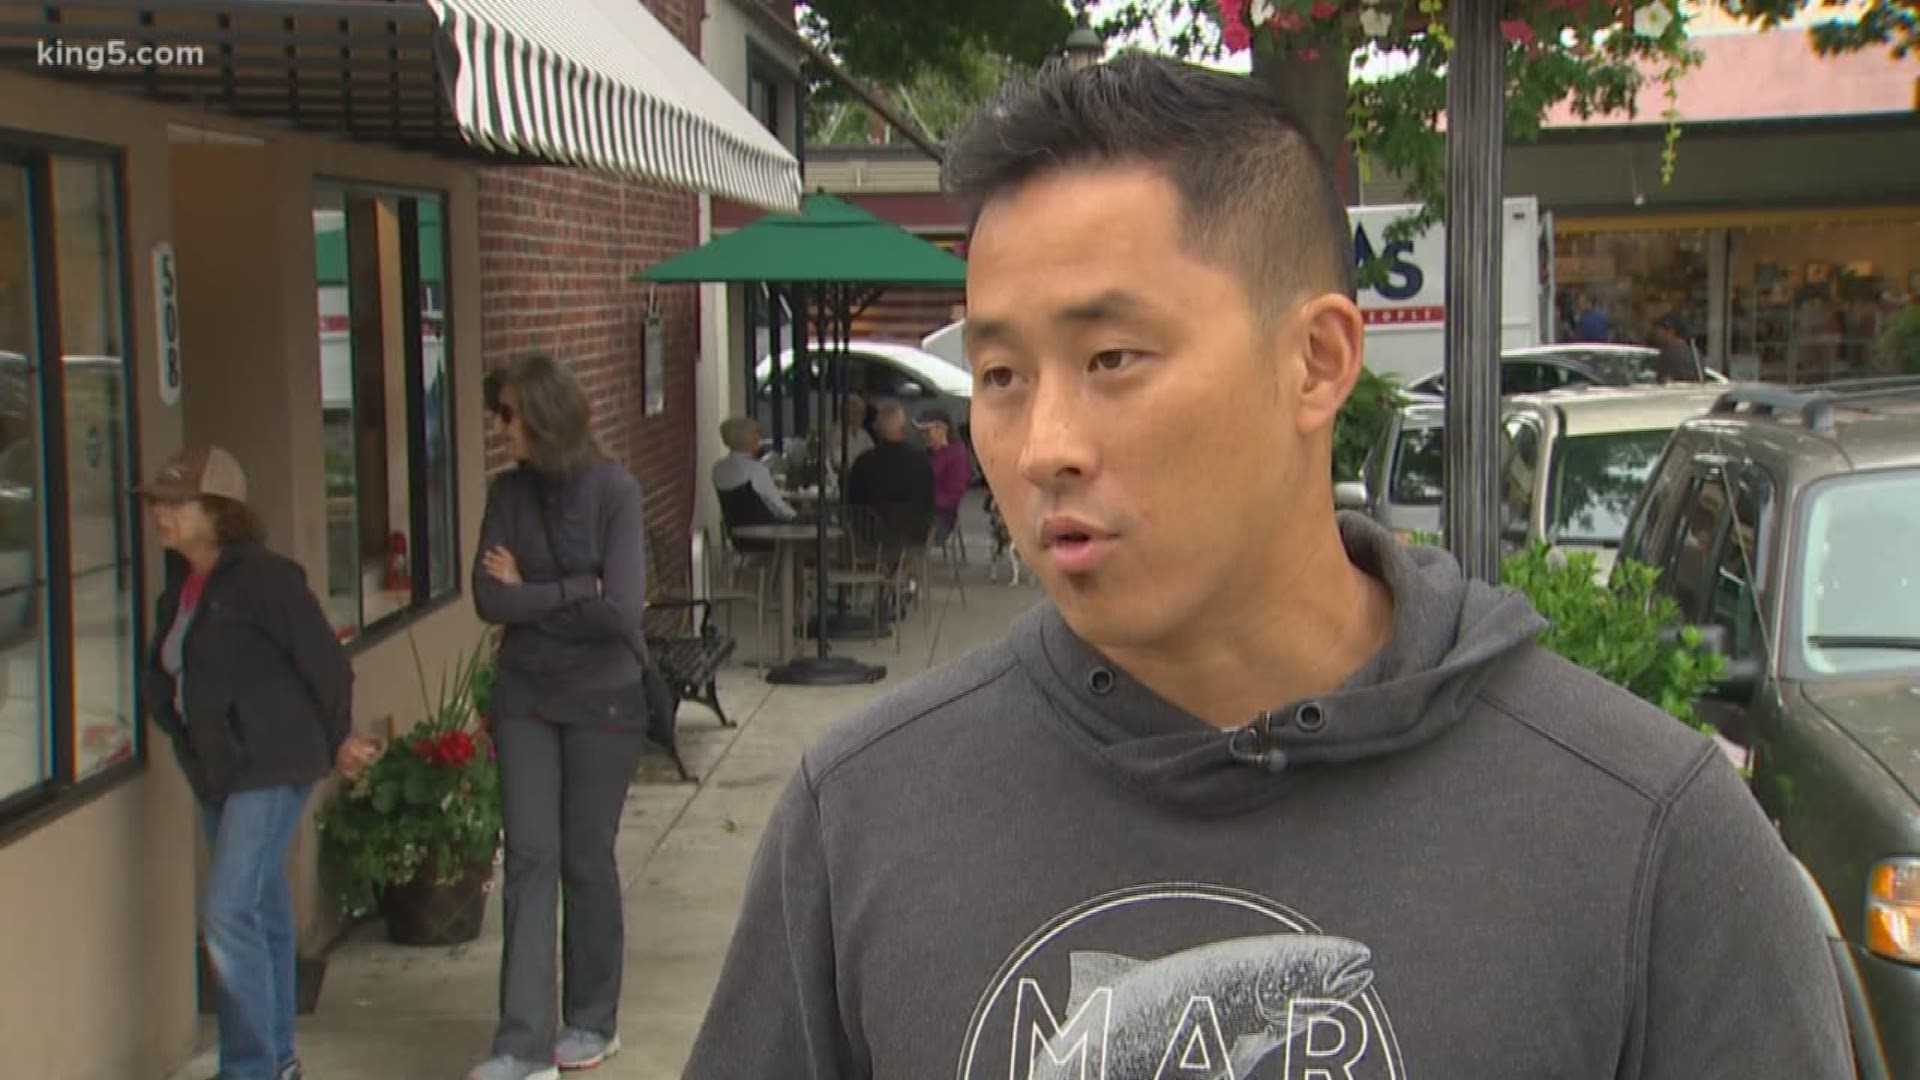 Shubert Ho is giving back to firefighters who helped save his business.